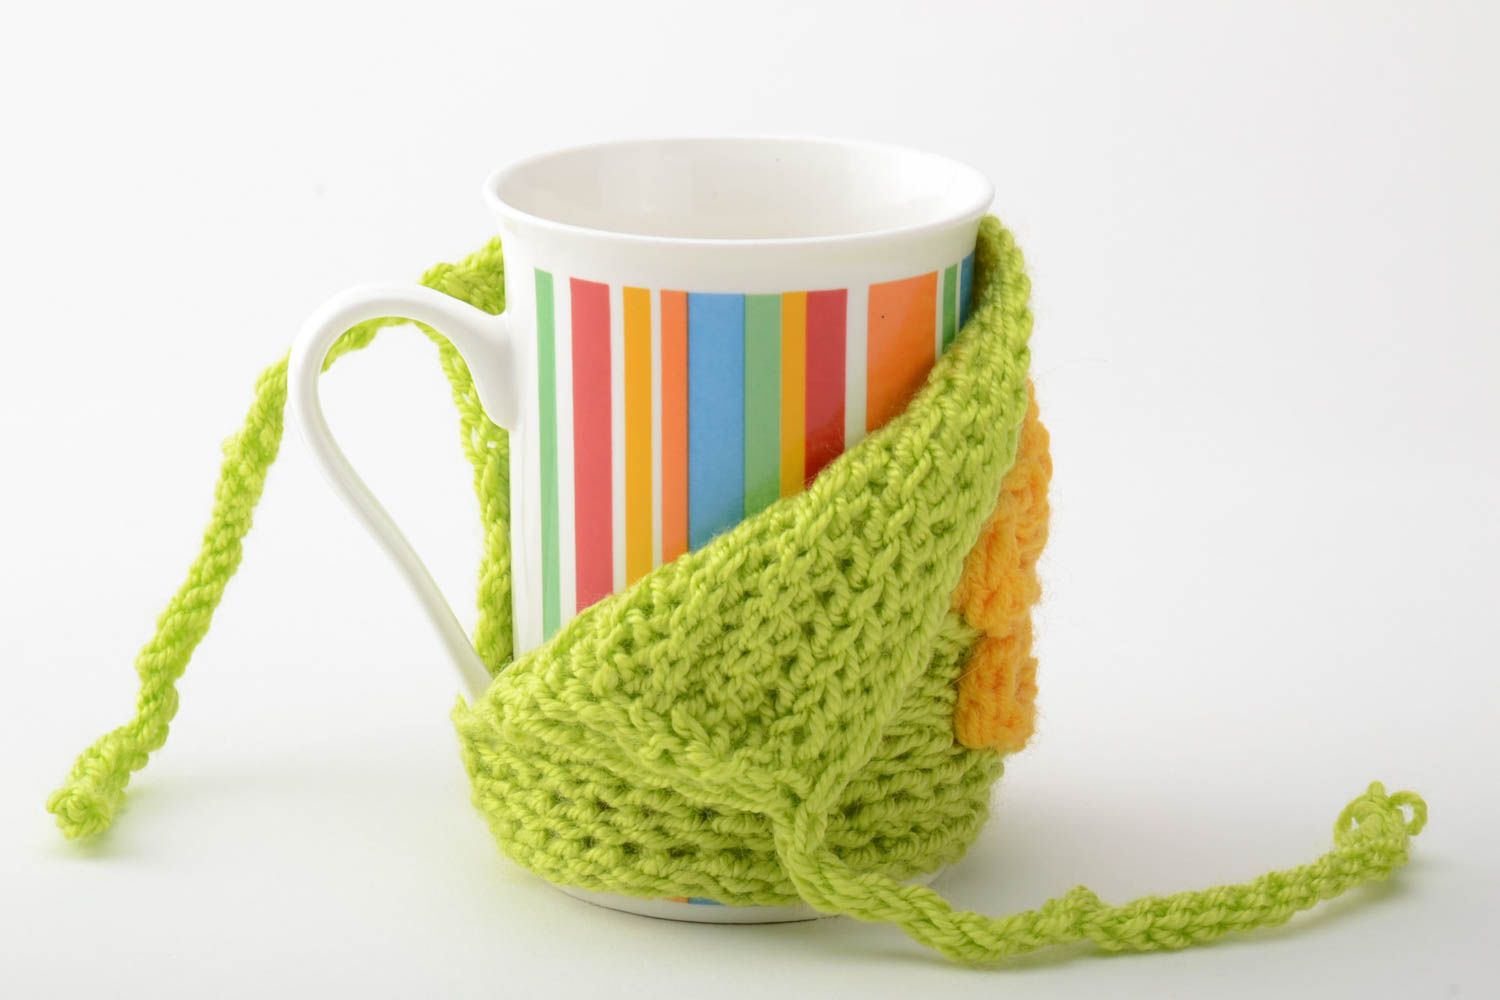 10 oz ceramic teacup with knitted cover can be personalized 0,53 lb photo 2